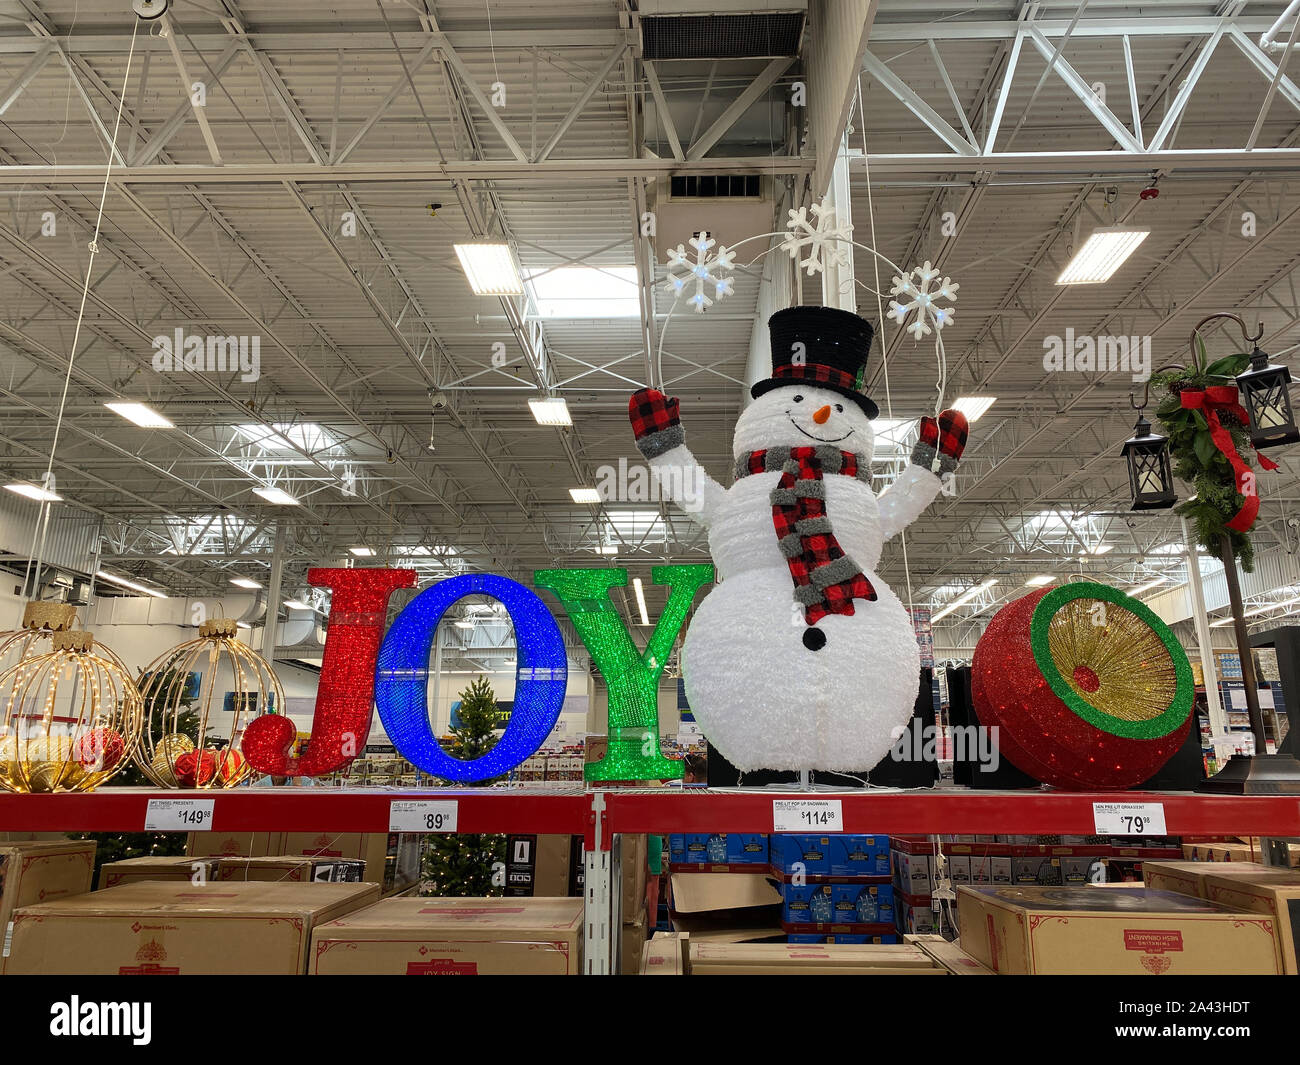 Orlando,FL/USA -10/11/19: The Christmas decoration aisle of a Sams Club  retail store with a variety of new Christmas decorations ready to be  purchase Stock Photo - Alamy